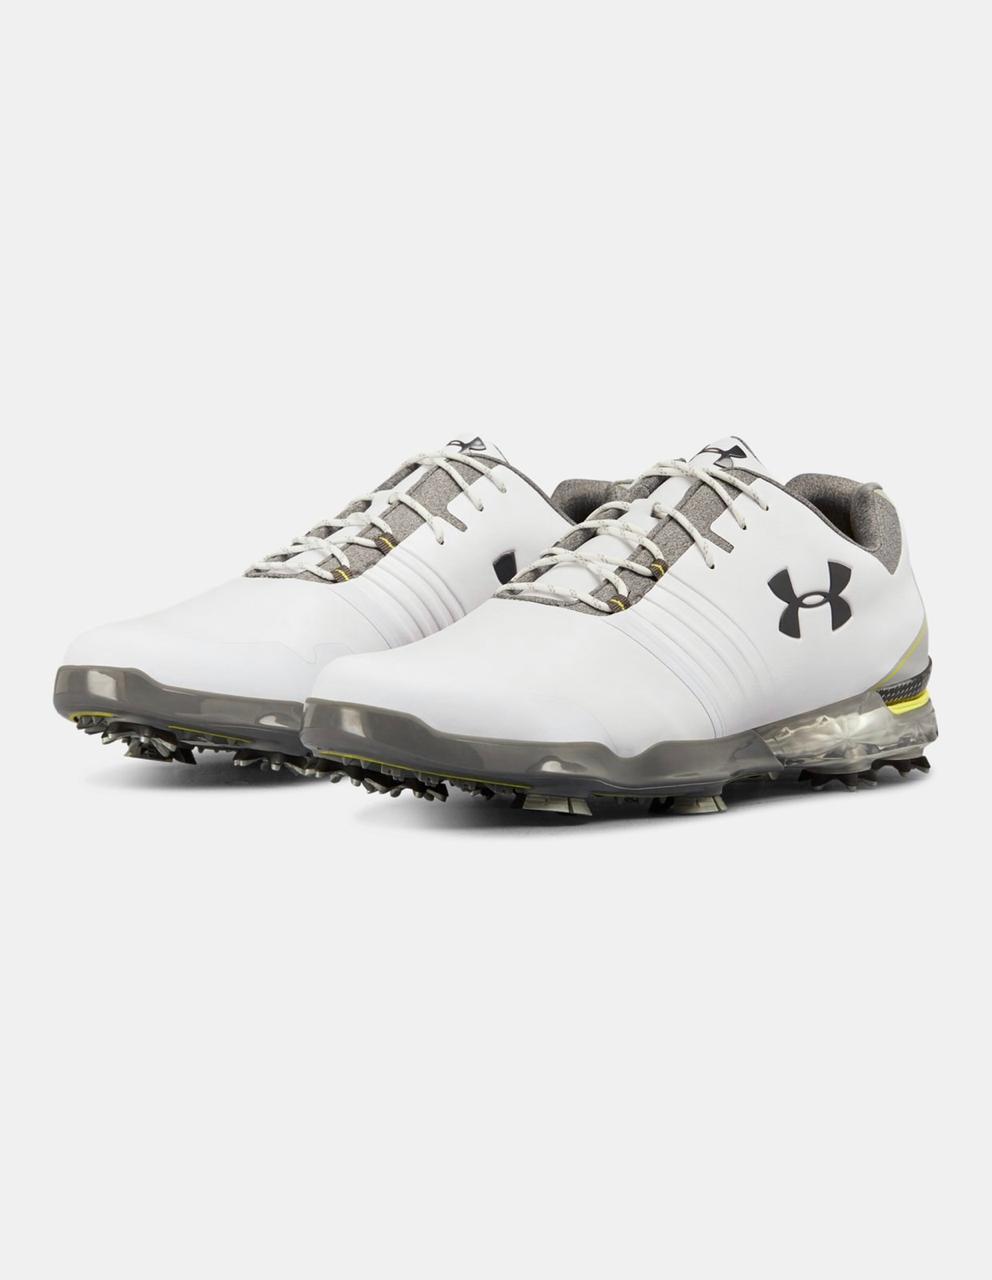 Buy Underarmour Golf Shoes at Best 